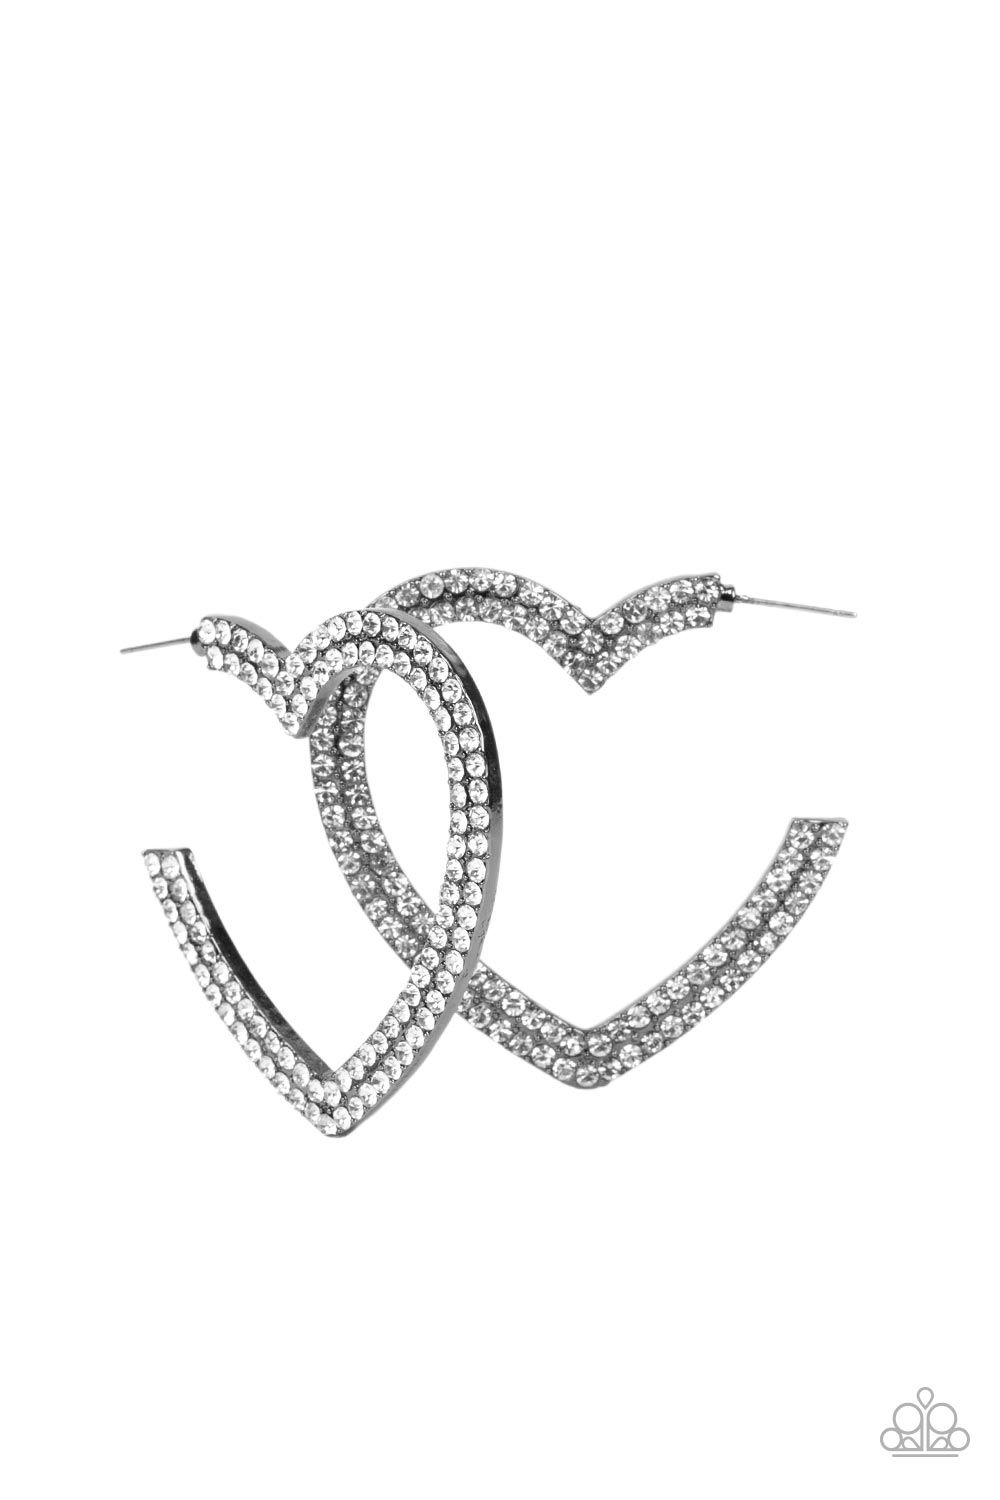 AMORE to Love Gunmetal Black and White Rhinestone Heart Hoop Earrings - Paparazzi Accessories- lightbox - CarasShop.com - $5 Jewelry by Cara Jewels